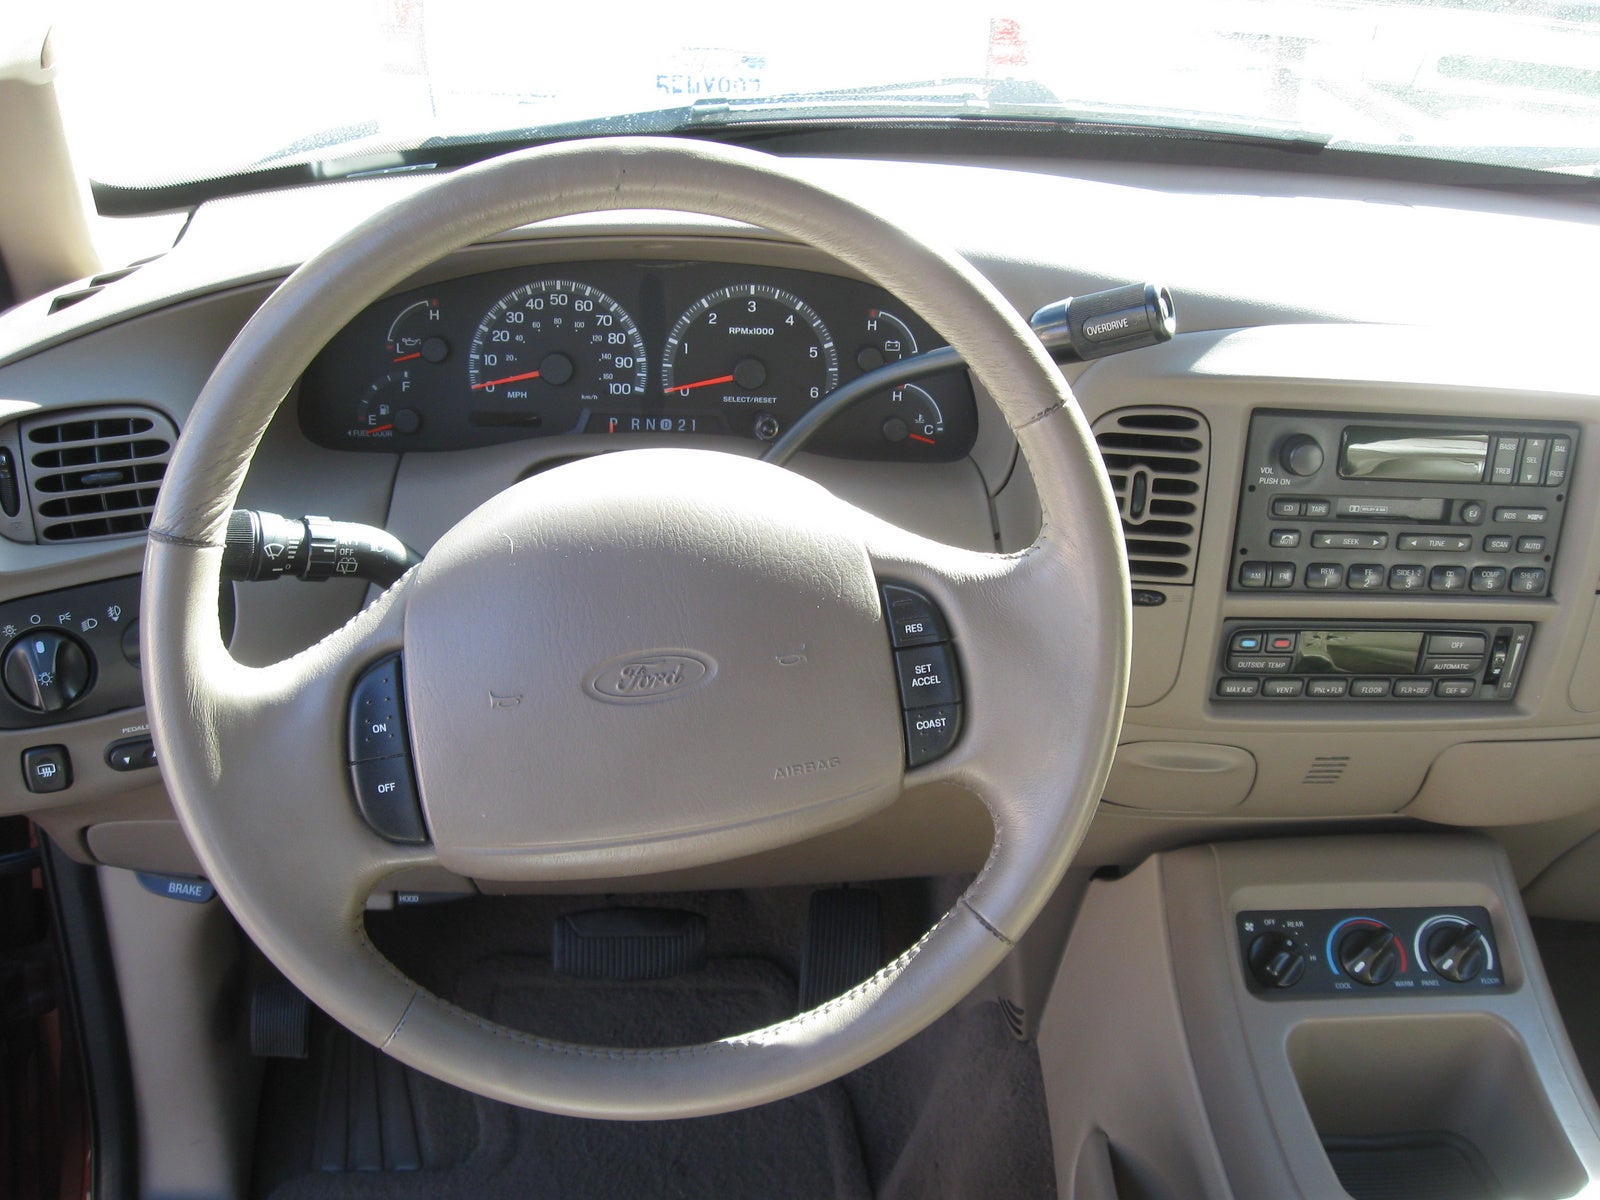 2000 Ford expedition interior #8